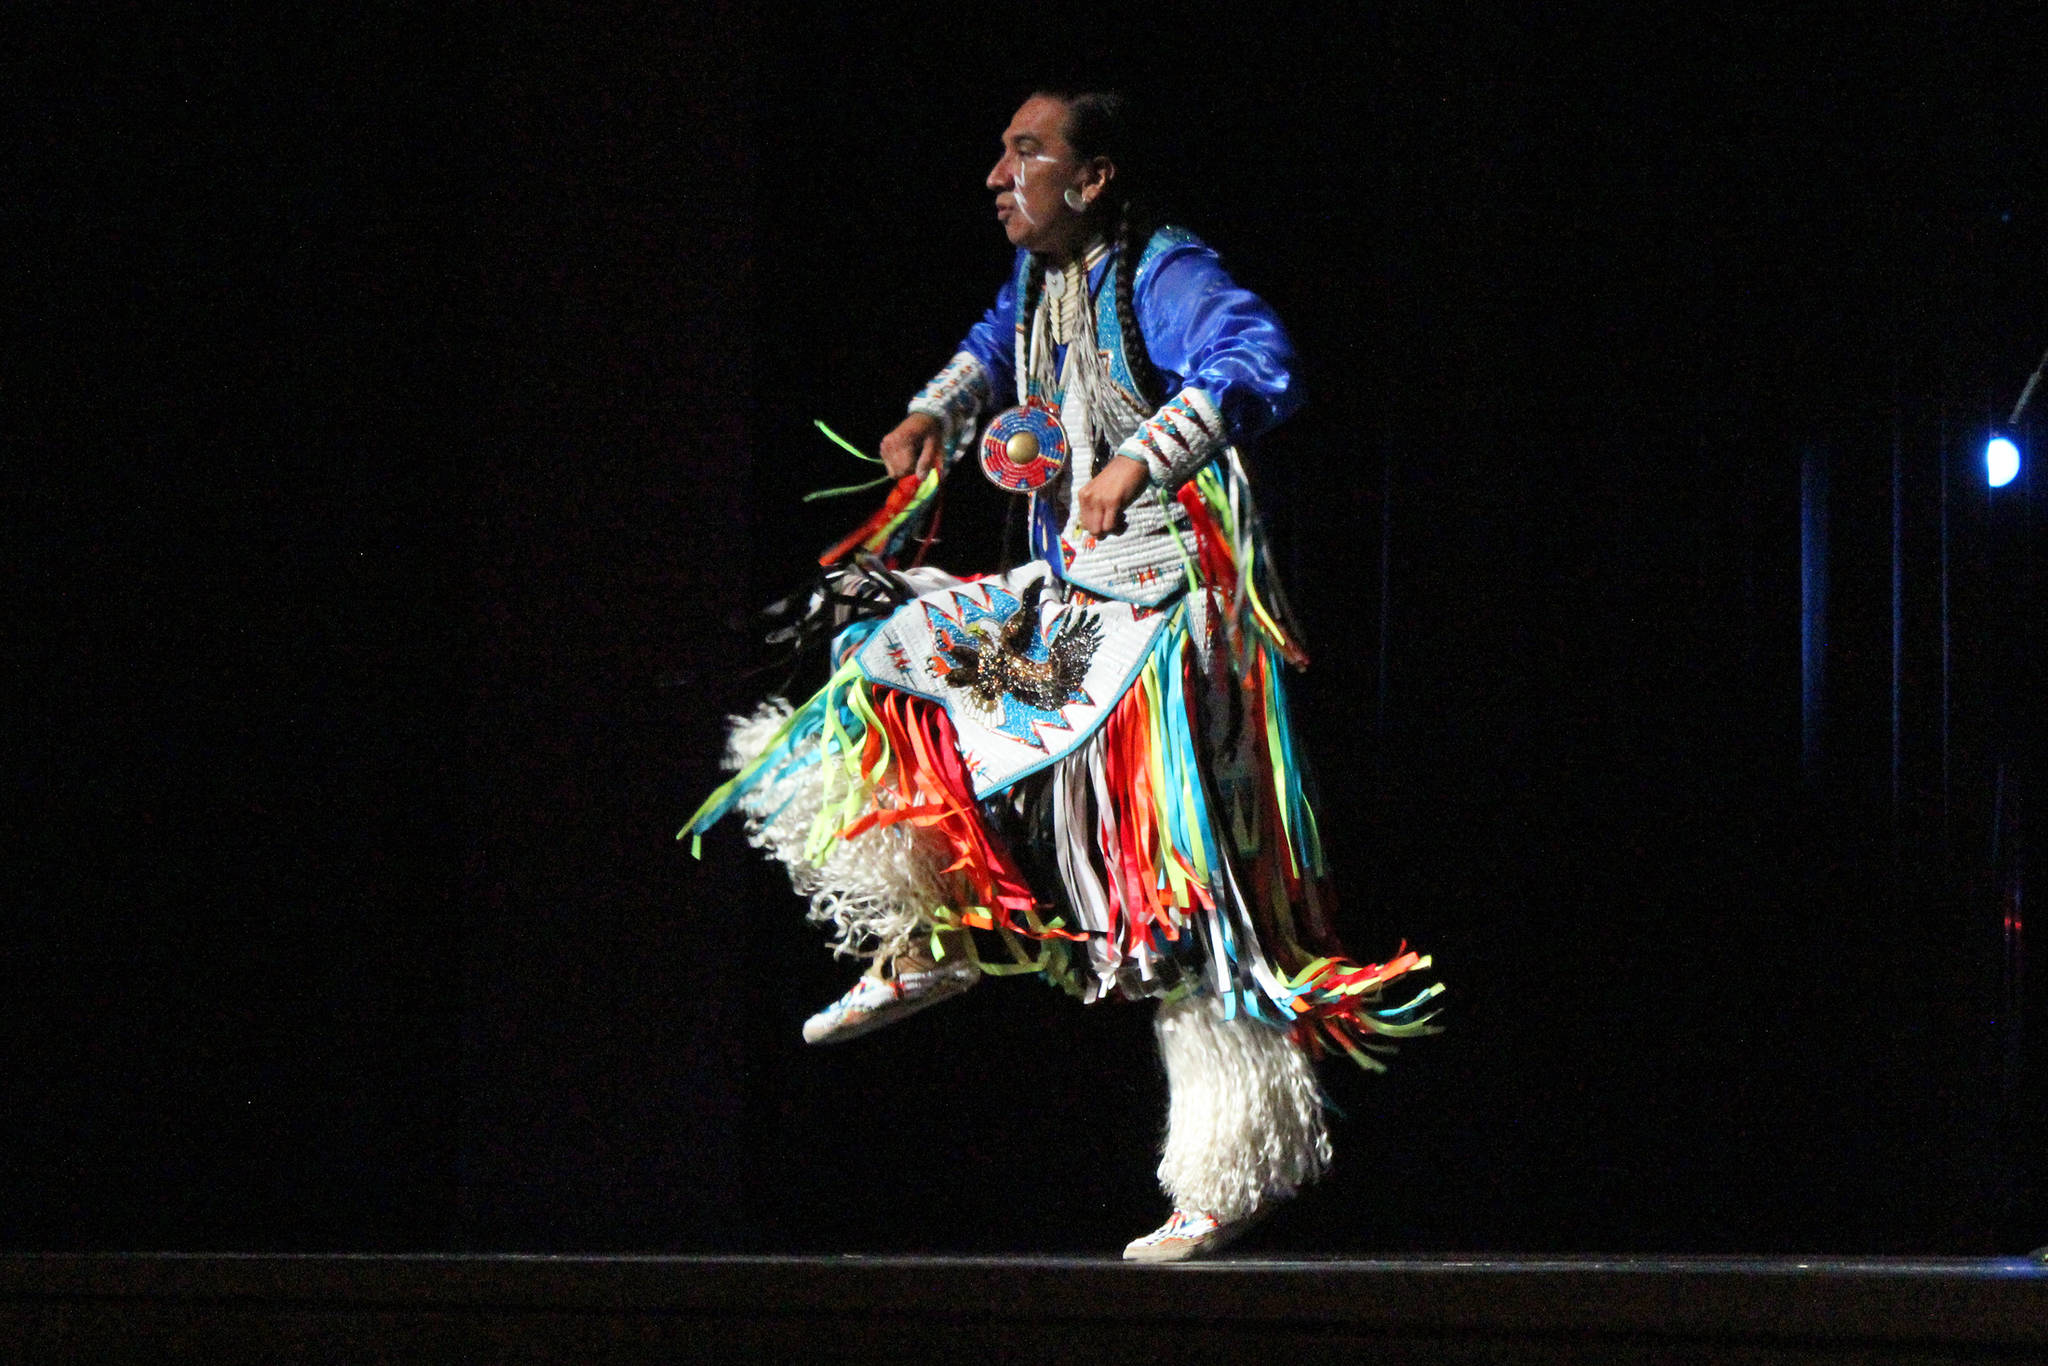 Larry Yazzi performs a dance for a small crowd Thursday, Sept. 6, 2018 in the Homer High School Mariner Theatre in Homer, Alaska. Yazzi’s group, the Native Pride Dancers, traveled from Minnesota to performs in several schools and venues on the Kenai Peninsula. Their visit was made possible by the by the Native Youth Community Project. (Photo by Megan Pacer/Homer News)